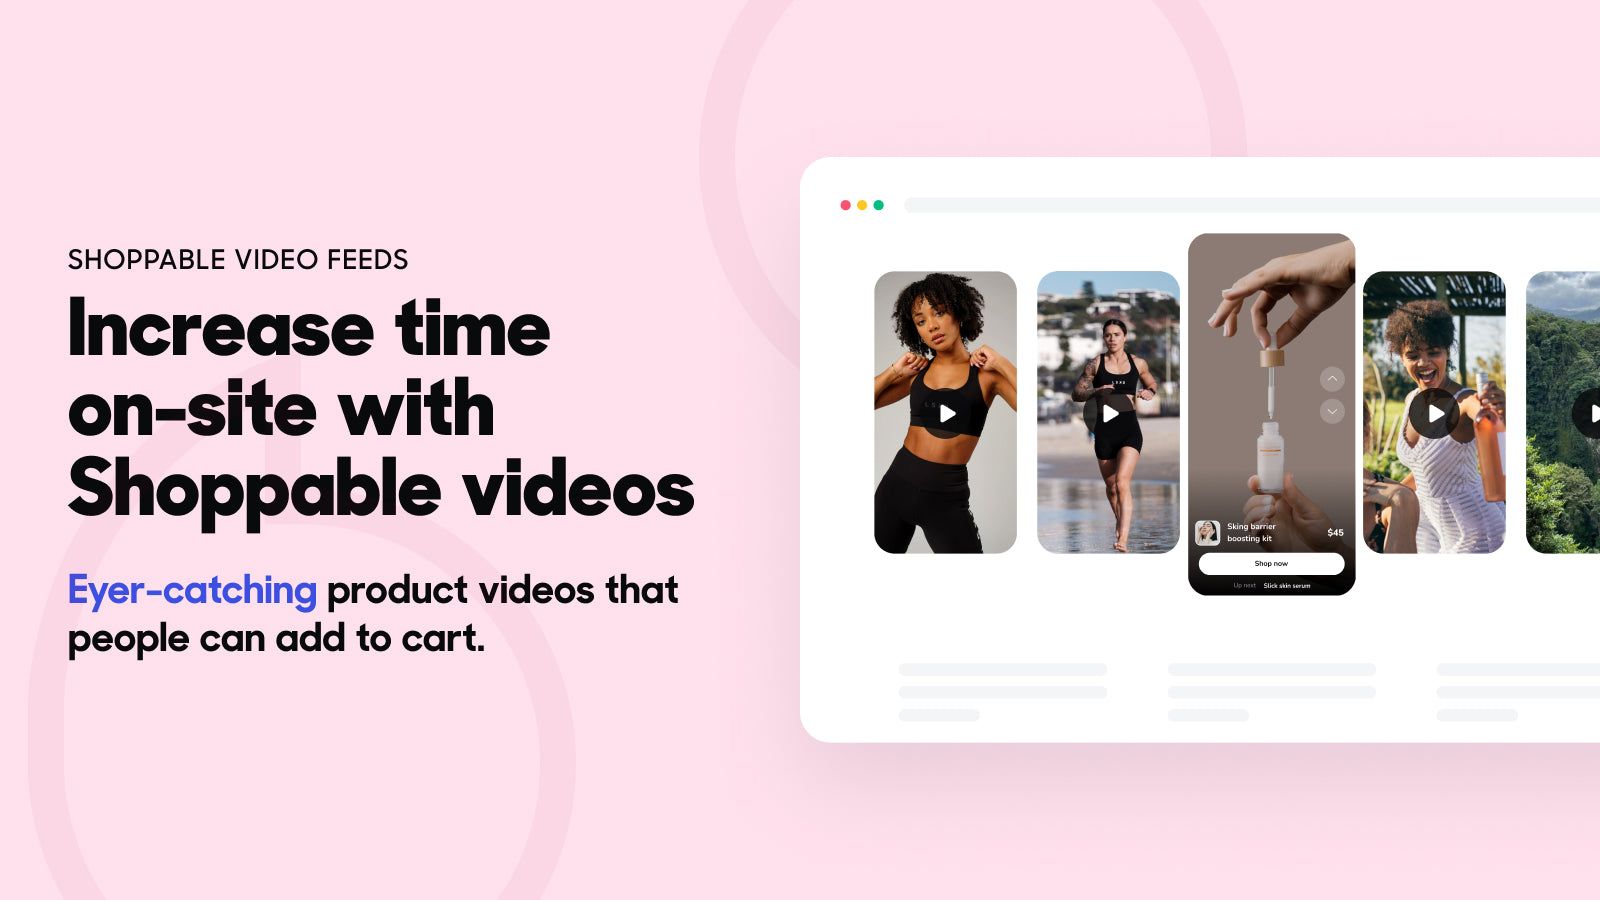 Increase time on-site with Shoppable video feeds